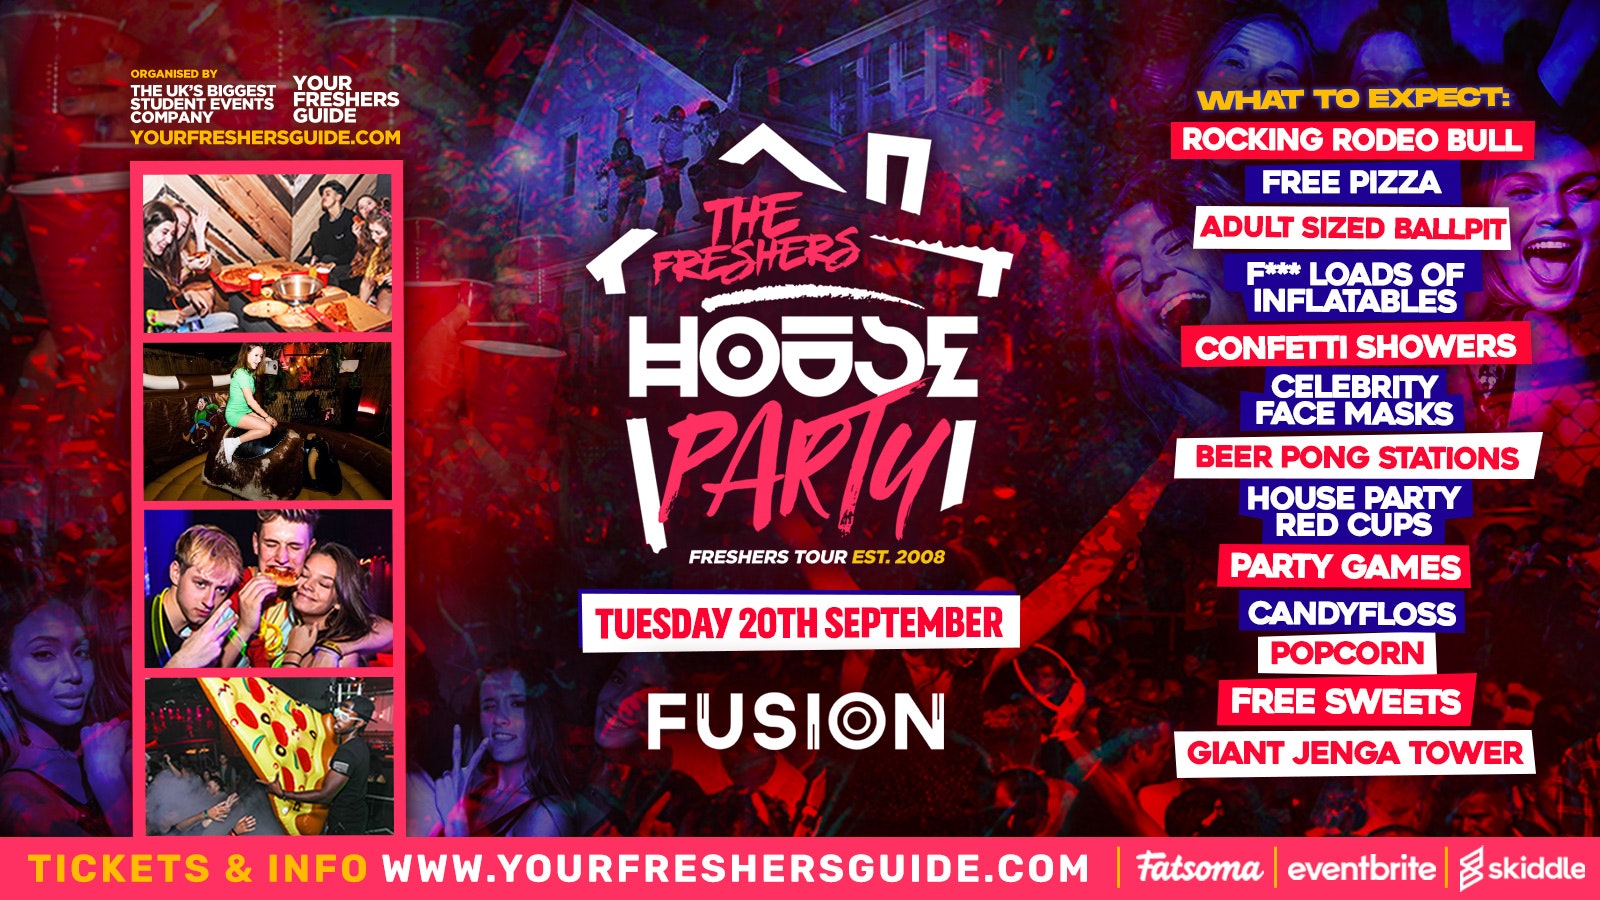 [TONIGHT – FUSION] – The Freshers House Party | Liverpool Freshers 2022 – £1 Tickets!